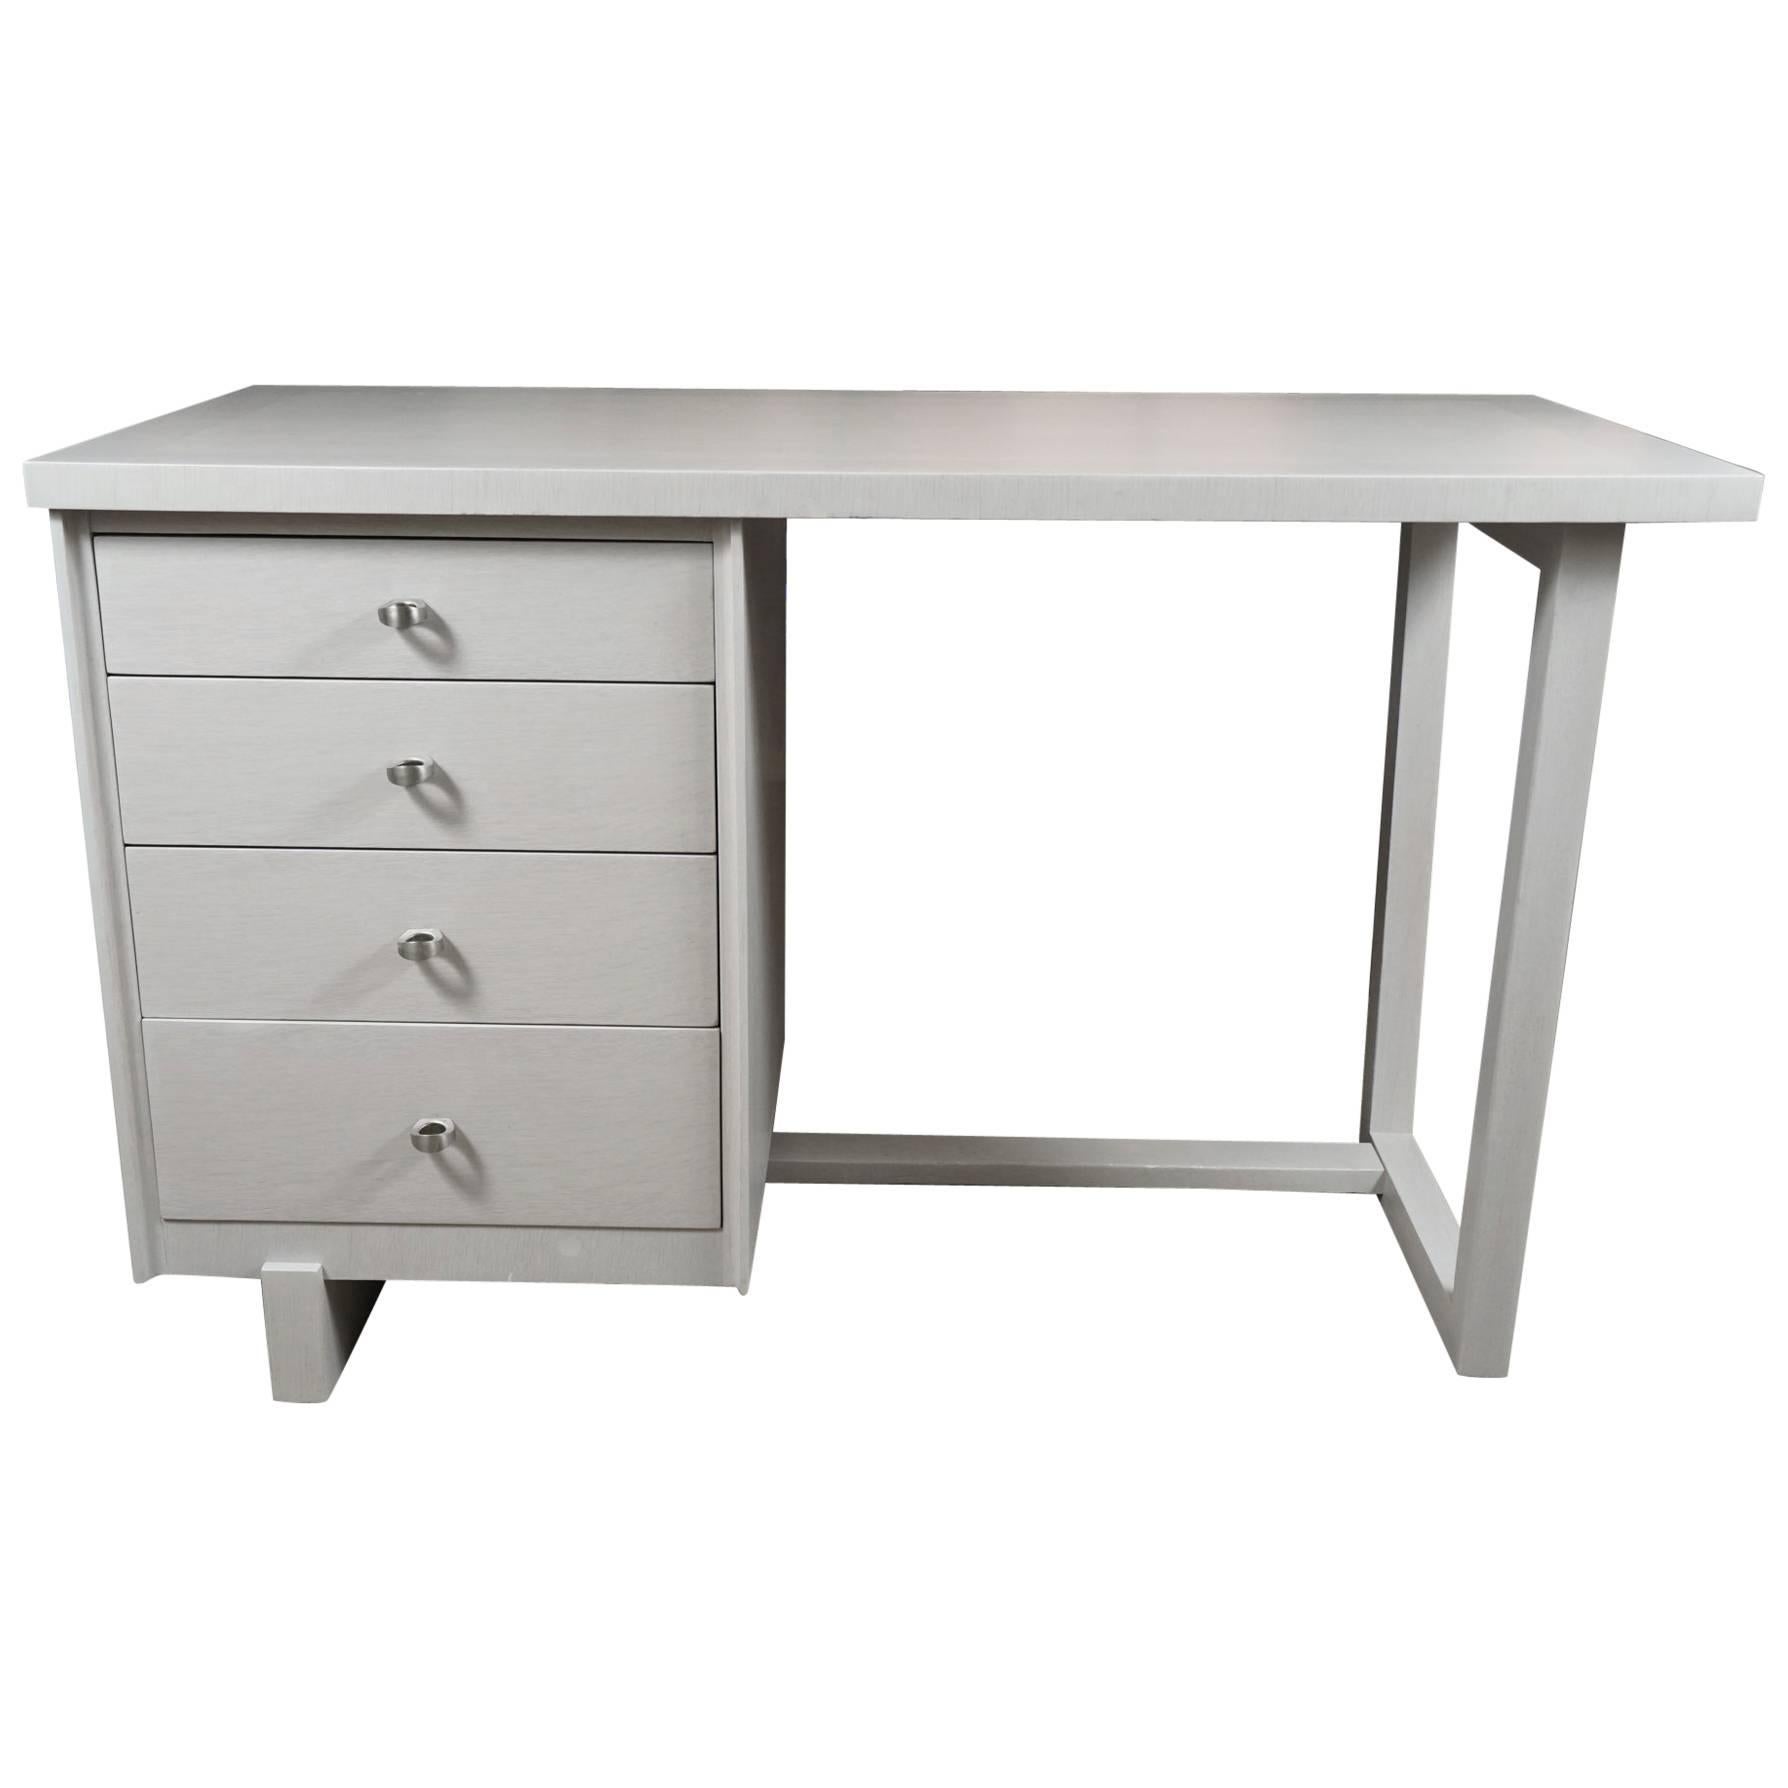 Paul McCobb Desk in a White Washed Finish For Sale